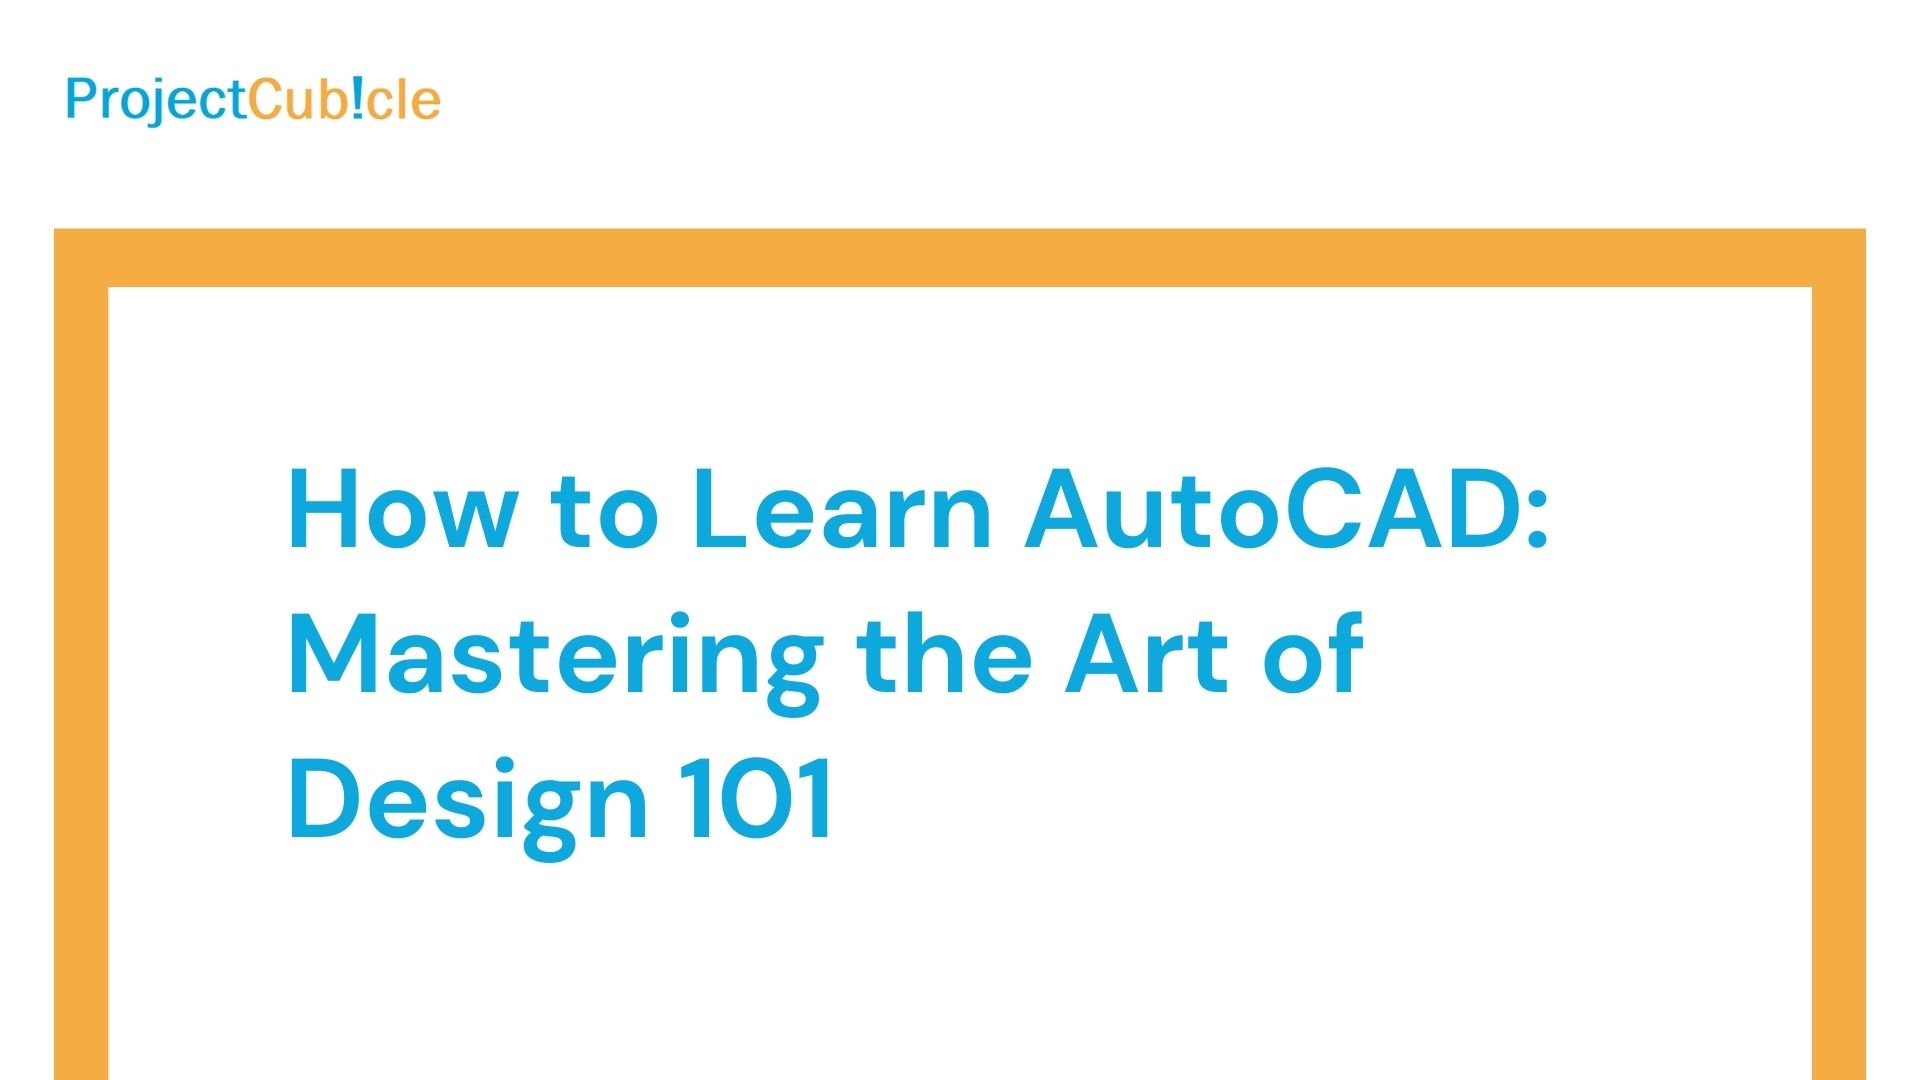 How to Learn AutoCAD: Mastering the Art of Design 101 - projectcubicle